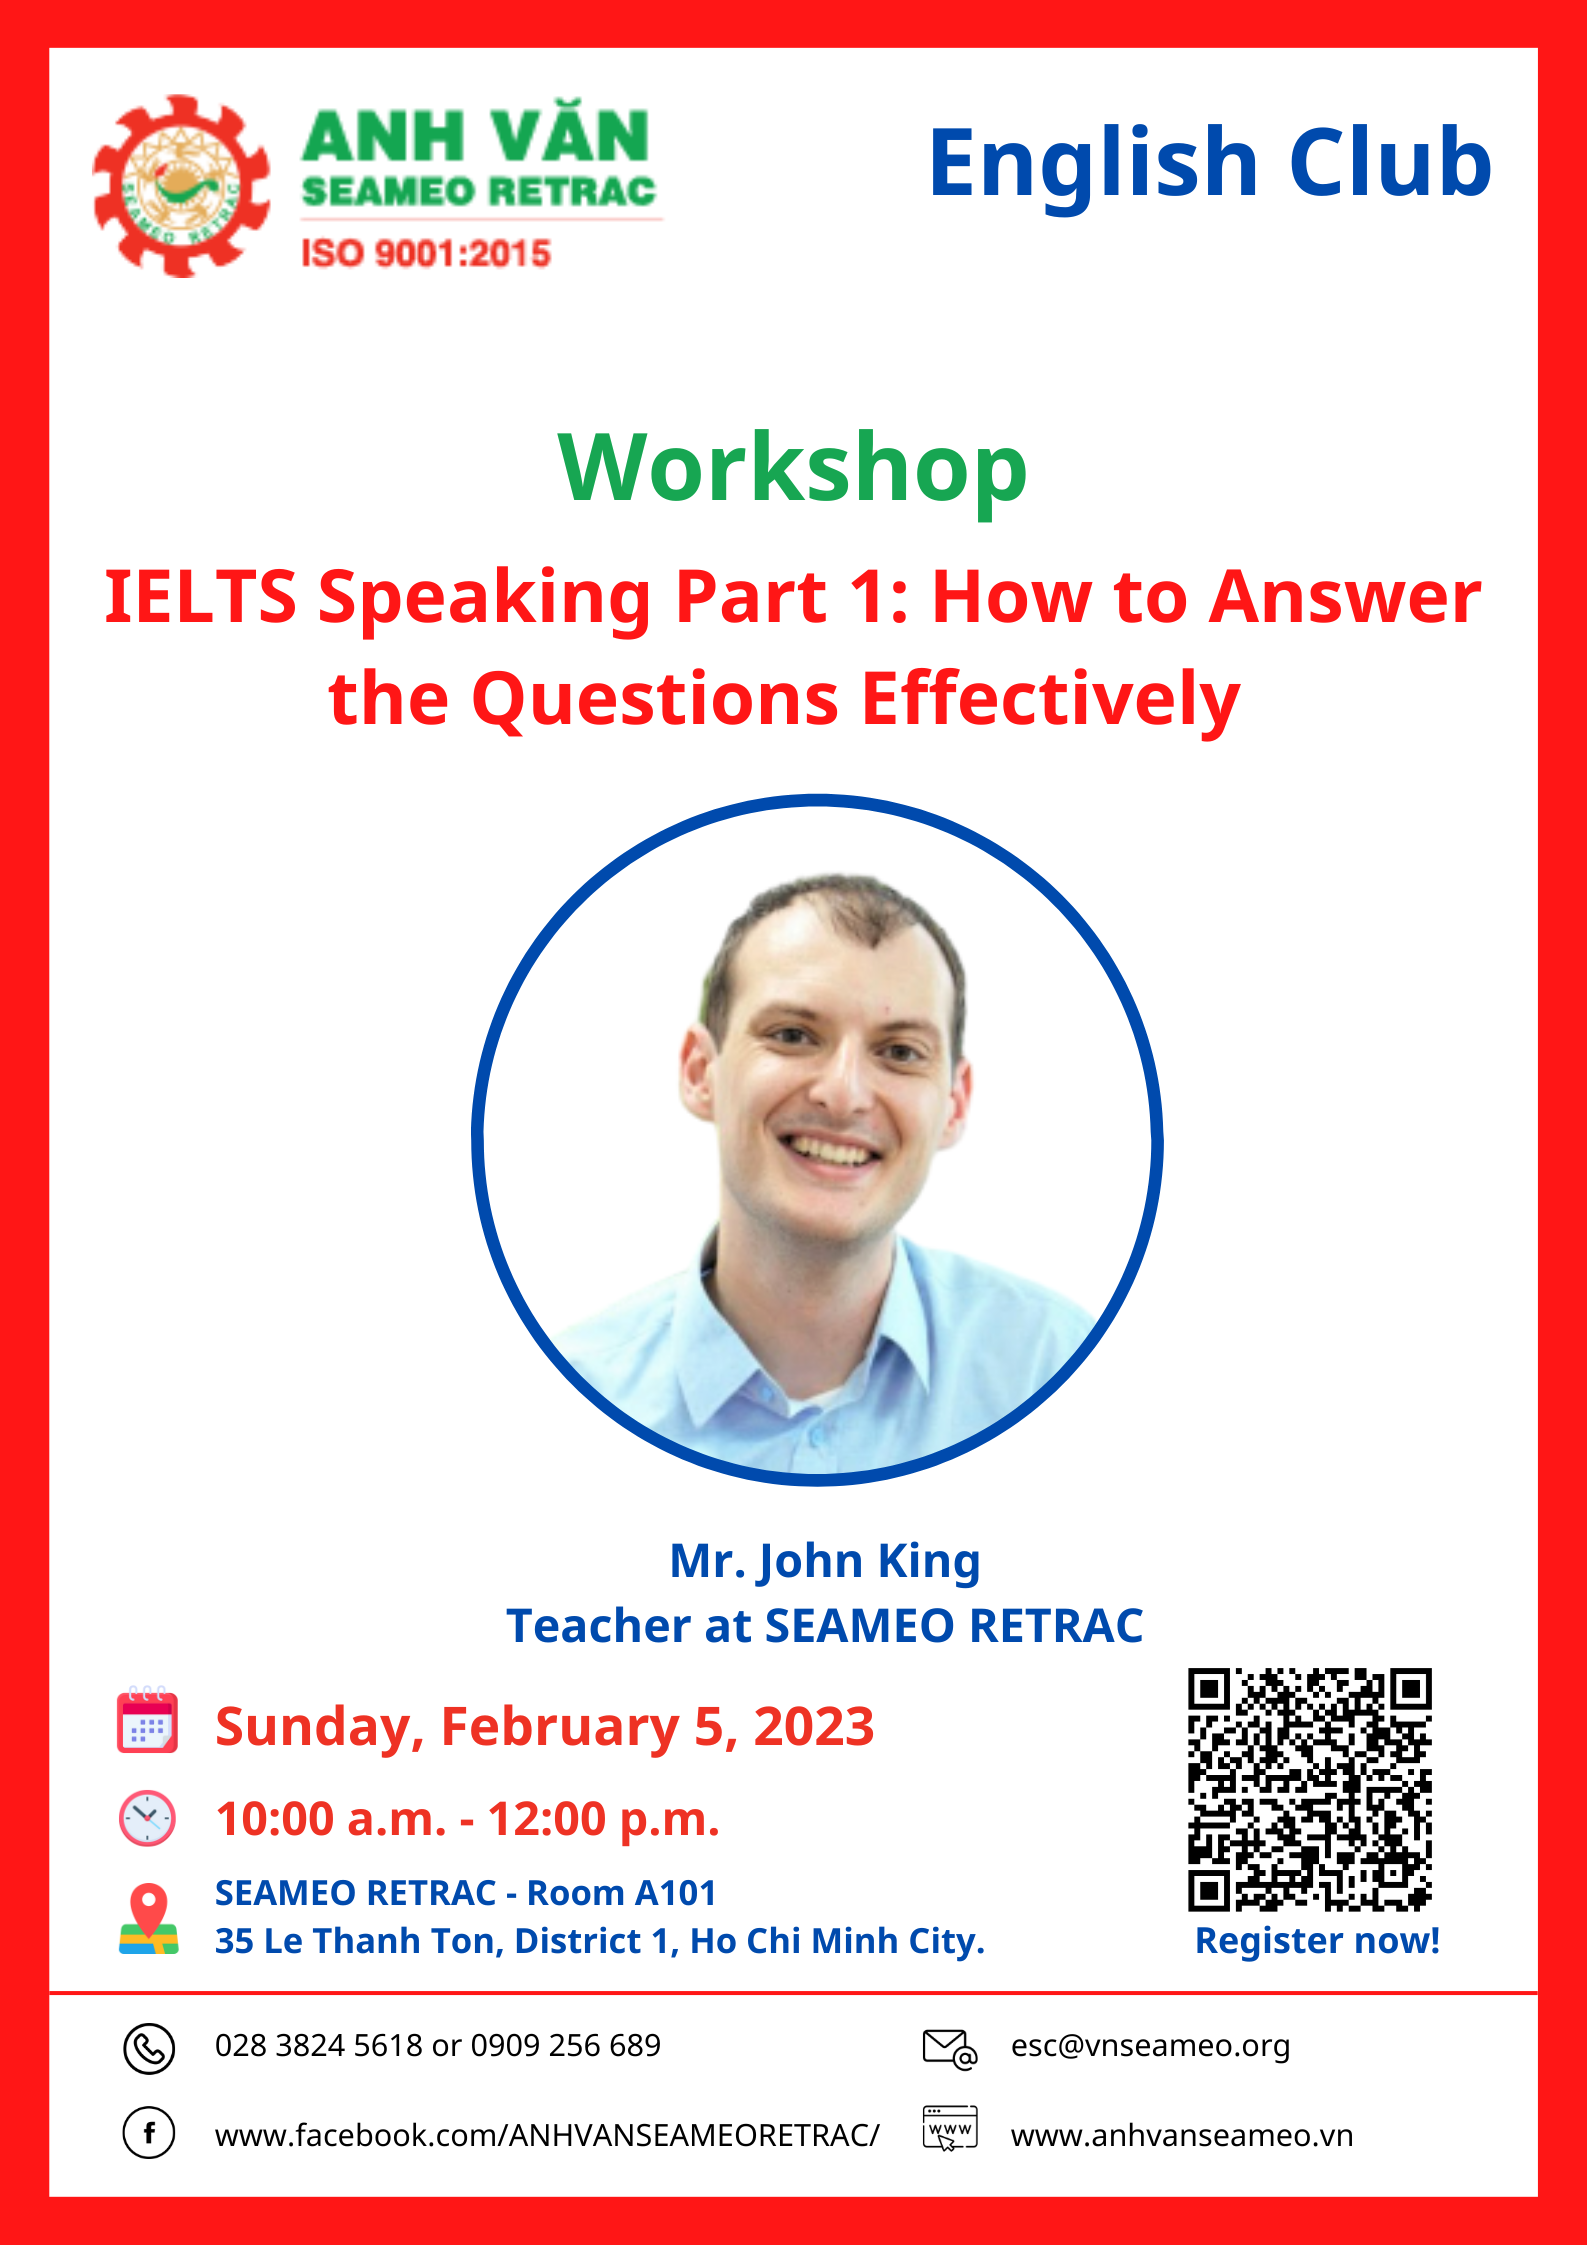 Buổi chia sẻ kiến thức với chủ đề “IELTS Speaking Part 1: How to Answer the Questions Effectively”